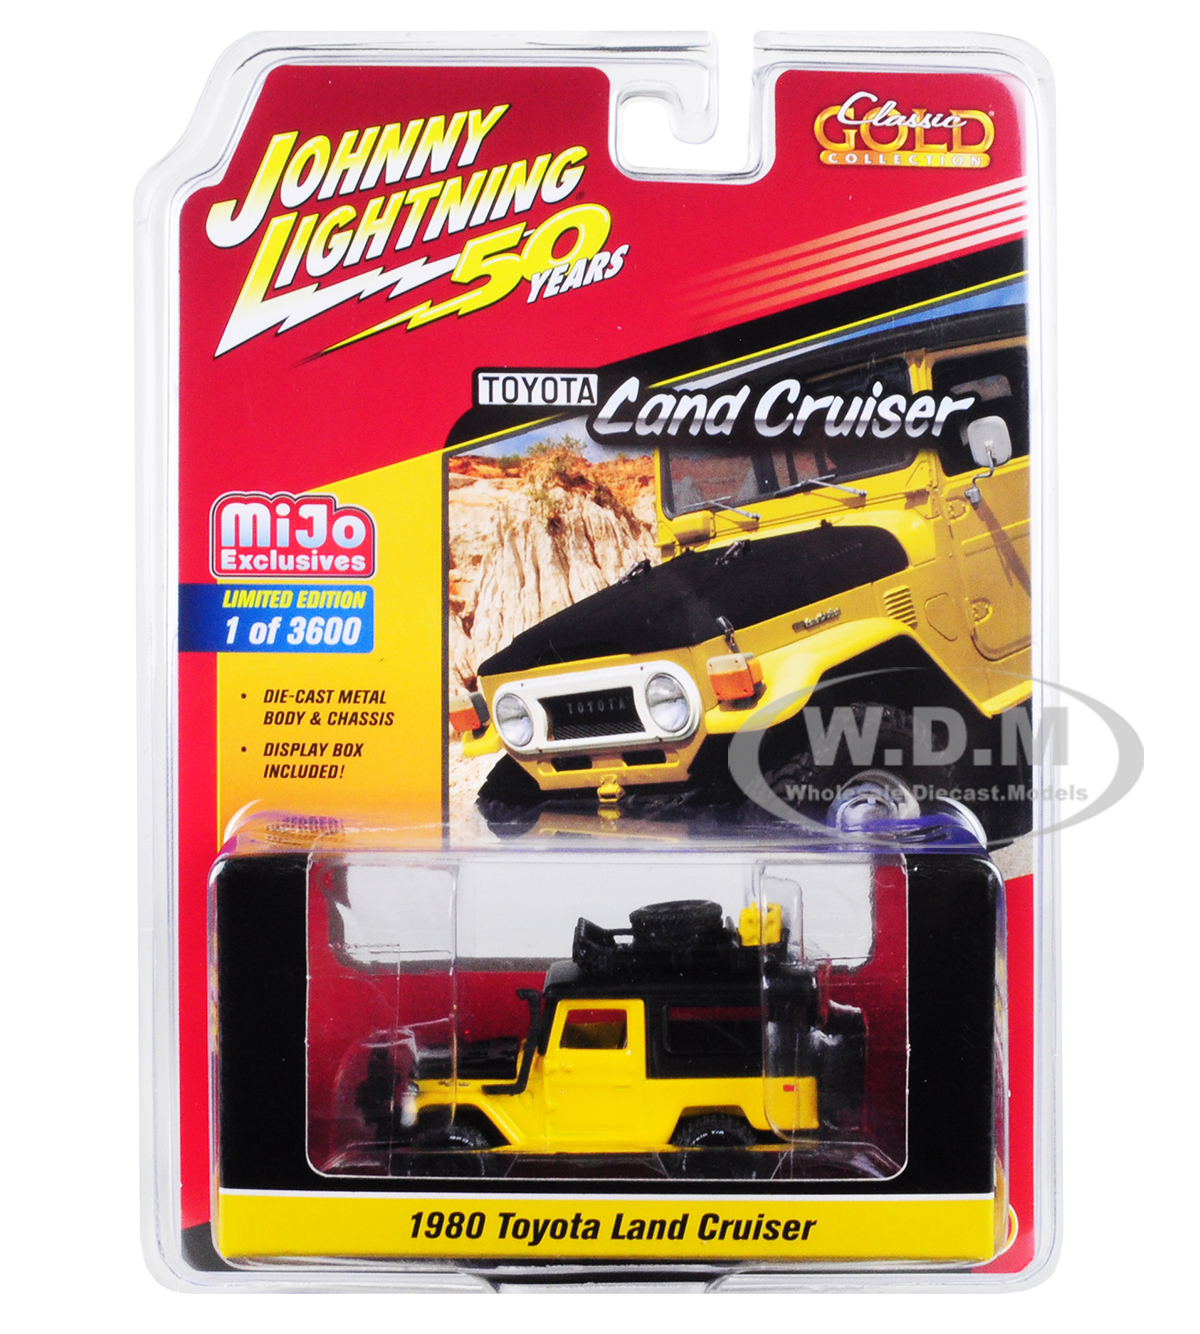 1980 Toyota Land Cruiser Yellow And Black With Accessories "johnny Lightning 50th Anniversary" Limited Edition To 3600 Pieces Worldwide 1/64 Diecast